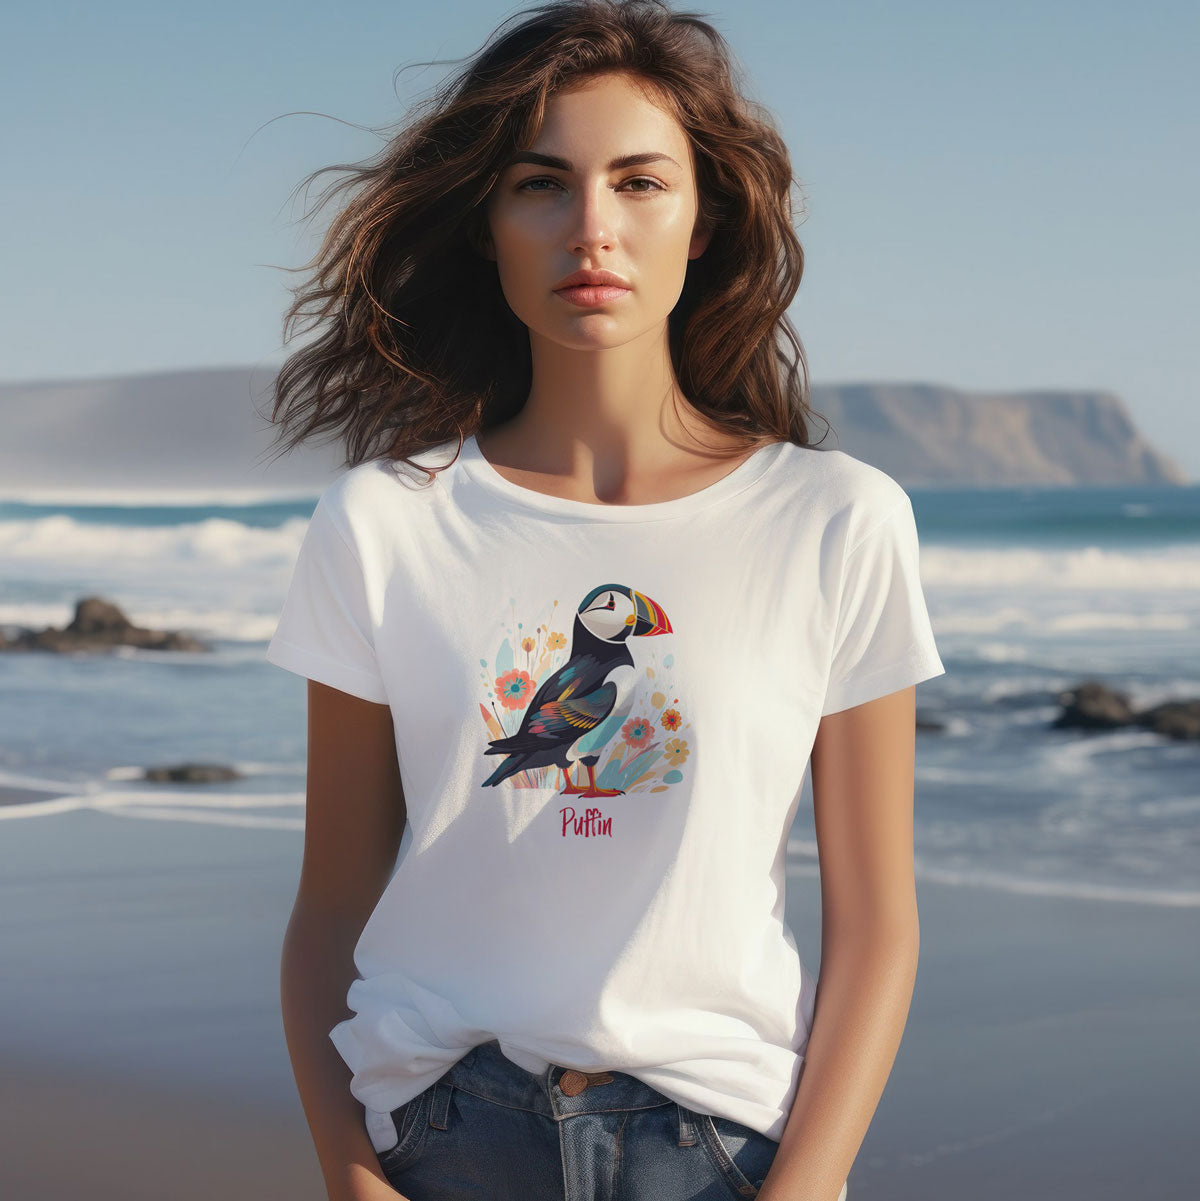 woman at the beach wearing a white t-shirt with a puffin bird print